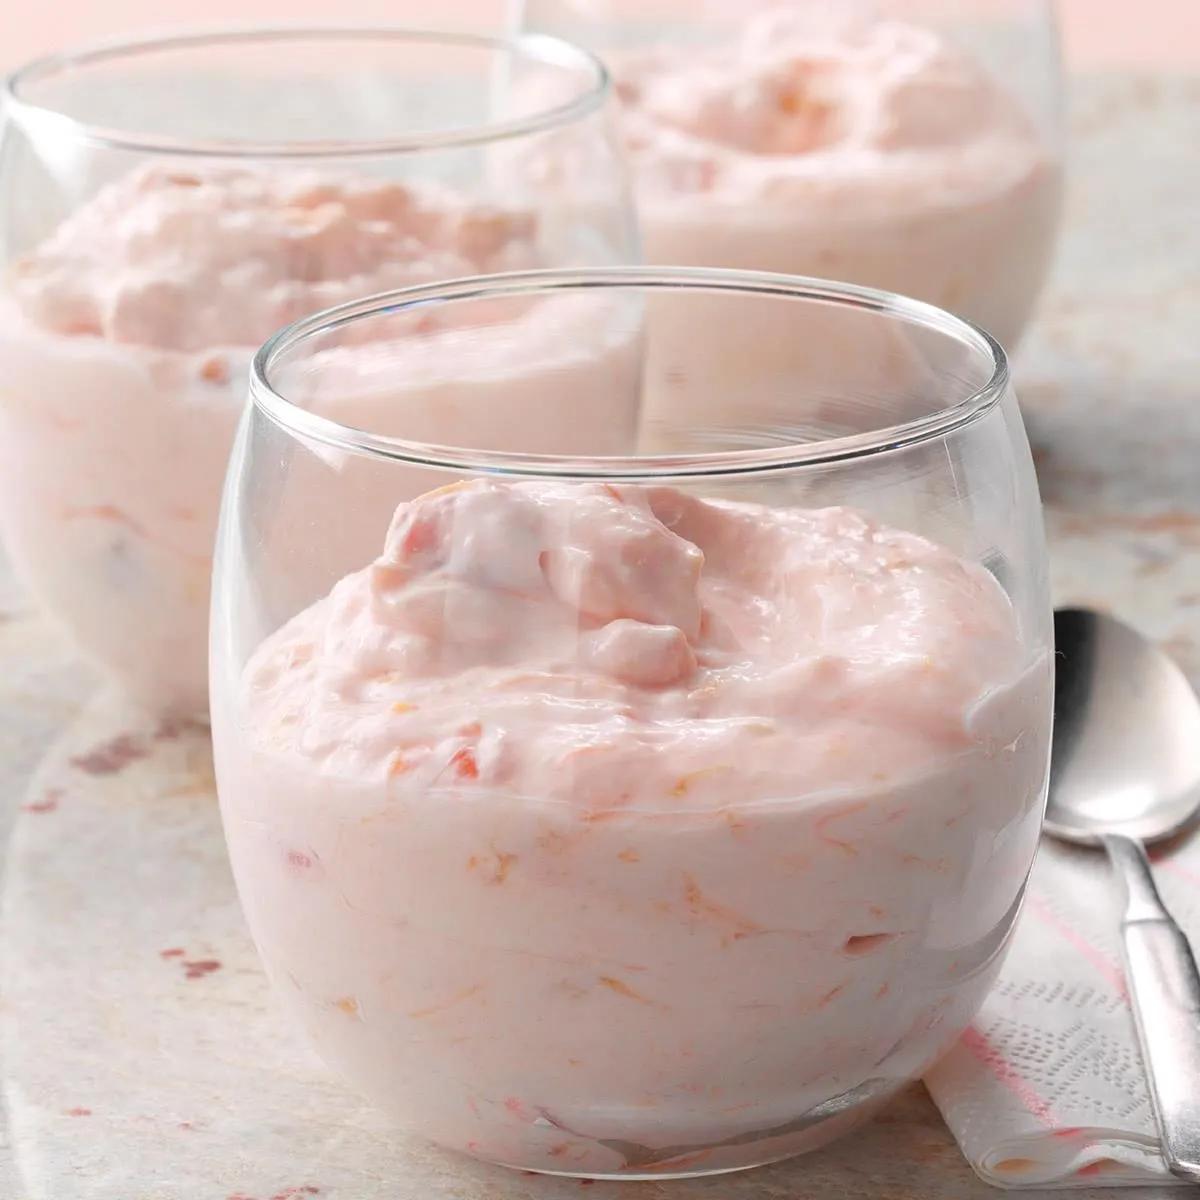 Tangy Rhubarb Fool Recipe: How to Make It